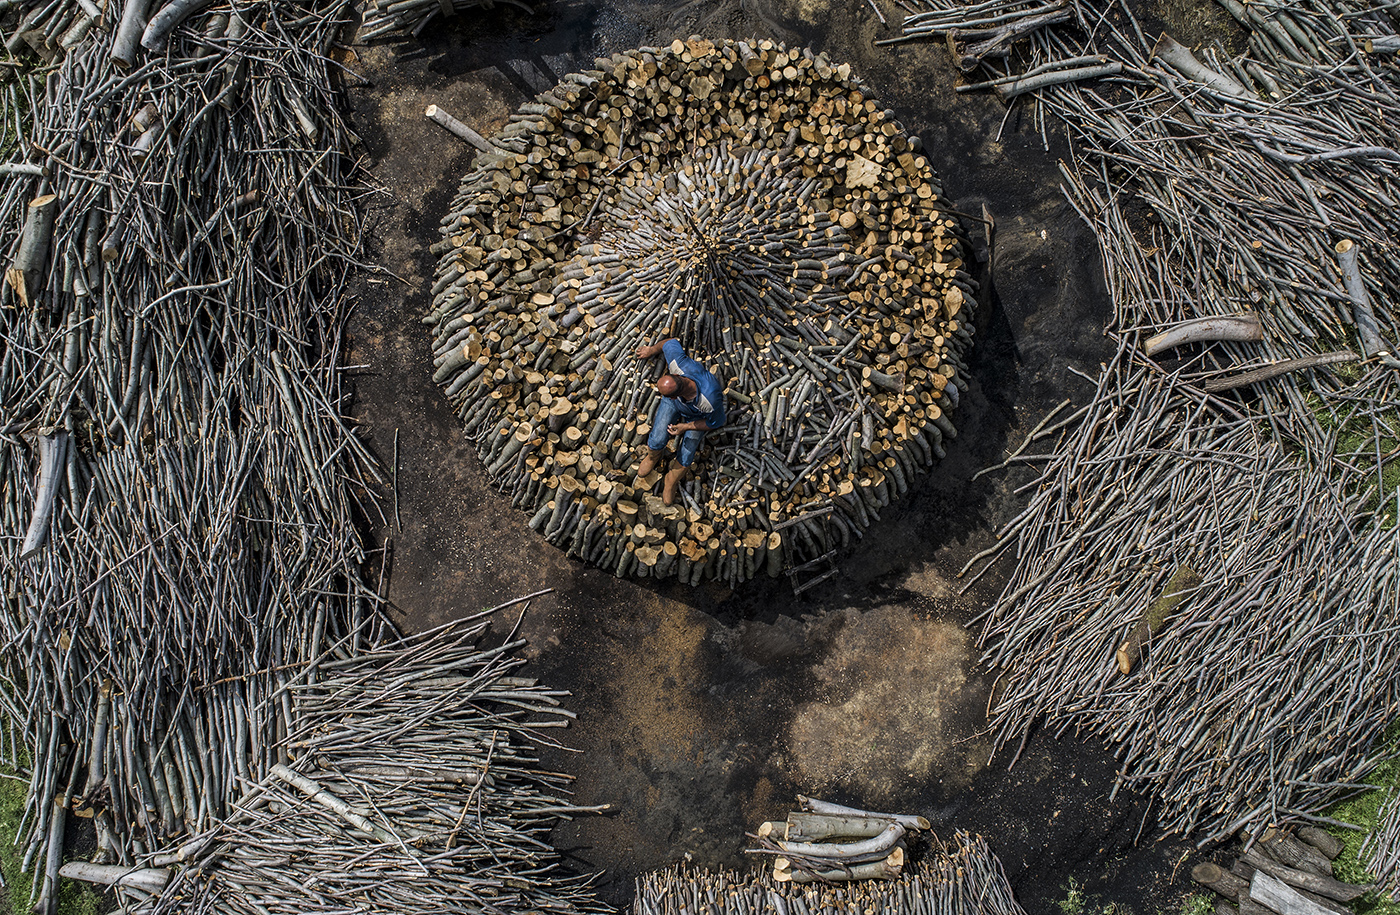 An aerial photo taken by a drone shows, a charcoal worker during preparations for the handcrafted charcoal in Istanbul, Turkey, 24 May 2019 (Issued on 26 May 2019) According to reports, 250,000 tonnes of charcoal are consumed every year in Turkey. Each year in the northern forests of Istanbul, traditional charcoal production starts in the summer The peasants living in the region cut their oak trees and systematically line them up as a circle, Then they covered it with soil and set on fire for a week, it is expected to cool down in two days.